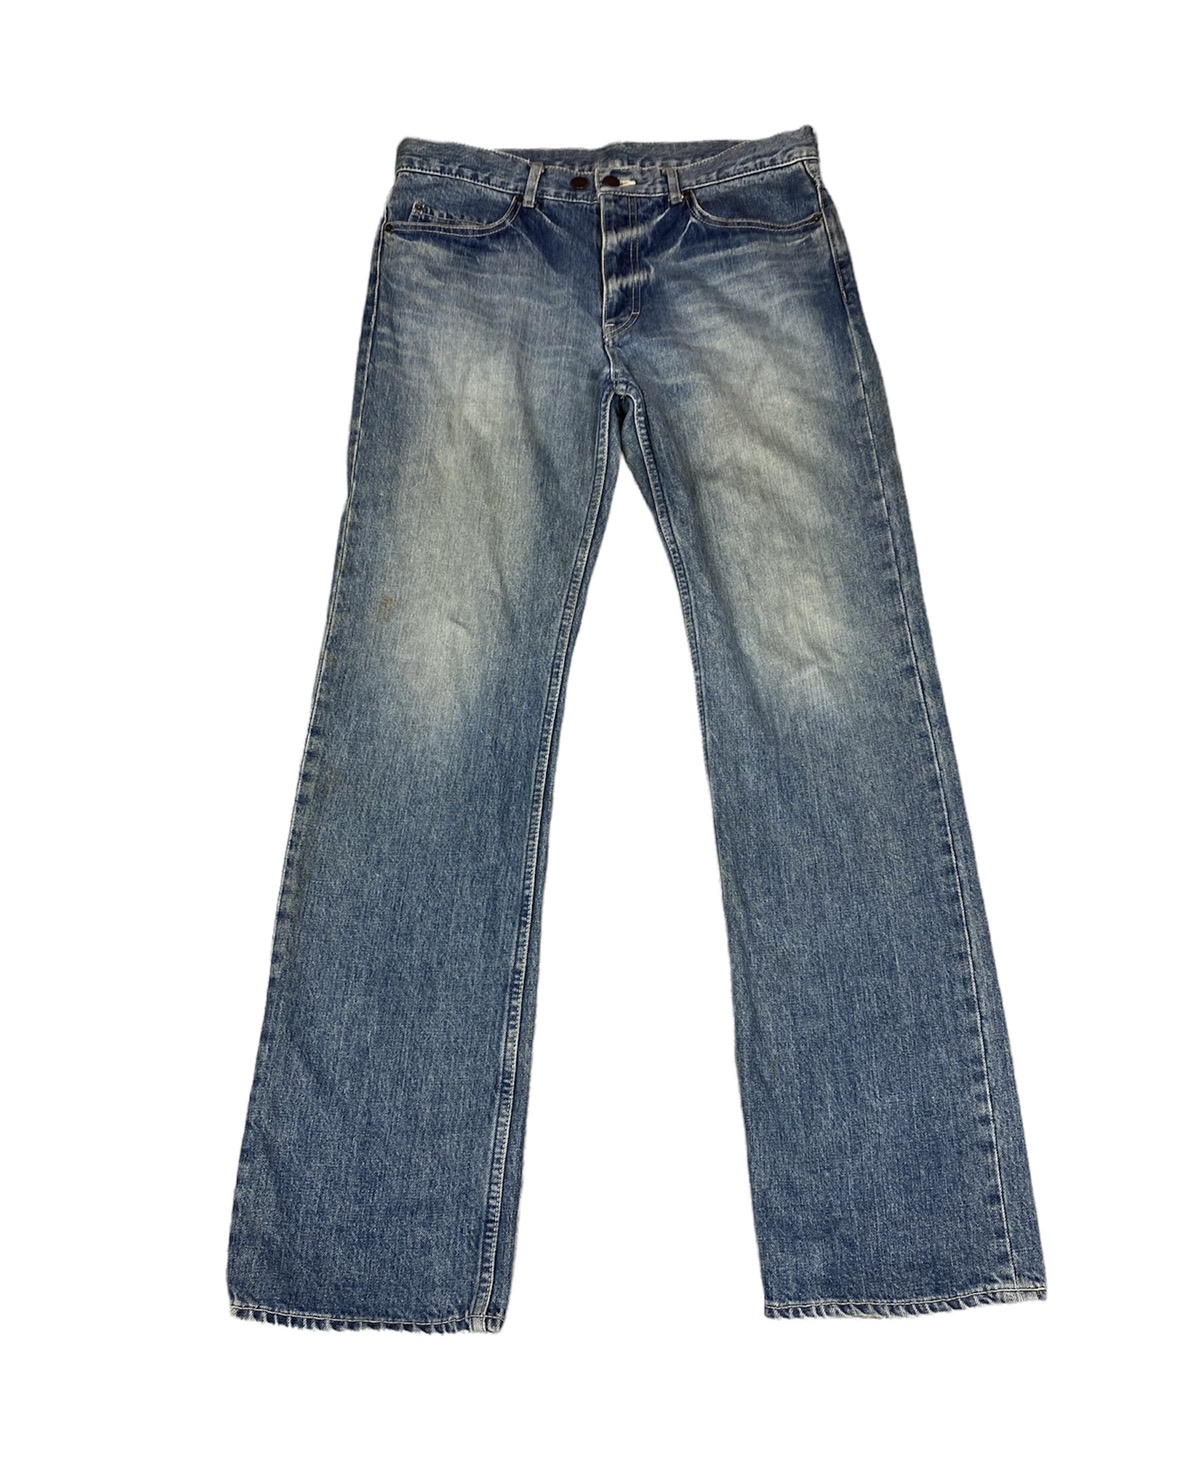 N. Hollywood Denim Faded Jeans. S0208 - 1